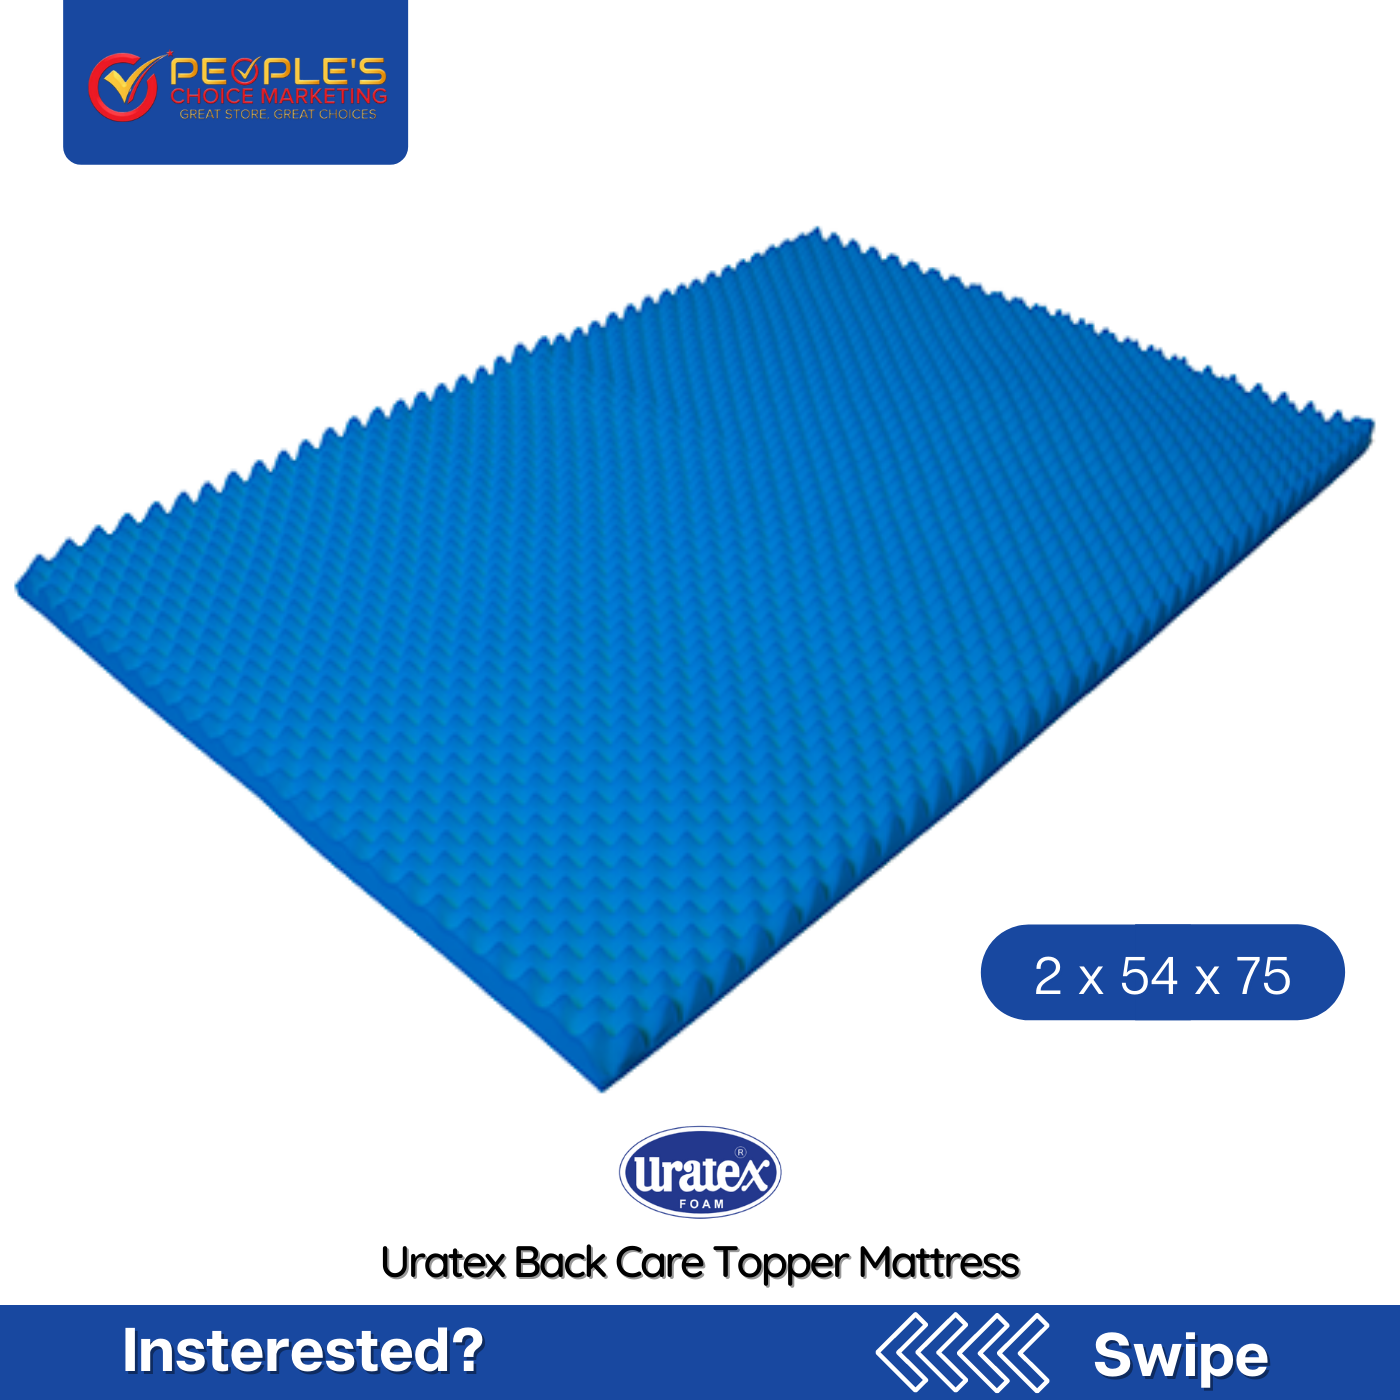 DMI Foam Mattress Topper, Egg Crate Foam Pad, Mattress Pad and Bed Topper  for Support, Air Circulation, Pressure Relief and Weight Distribution